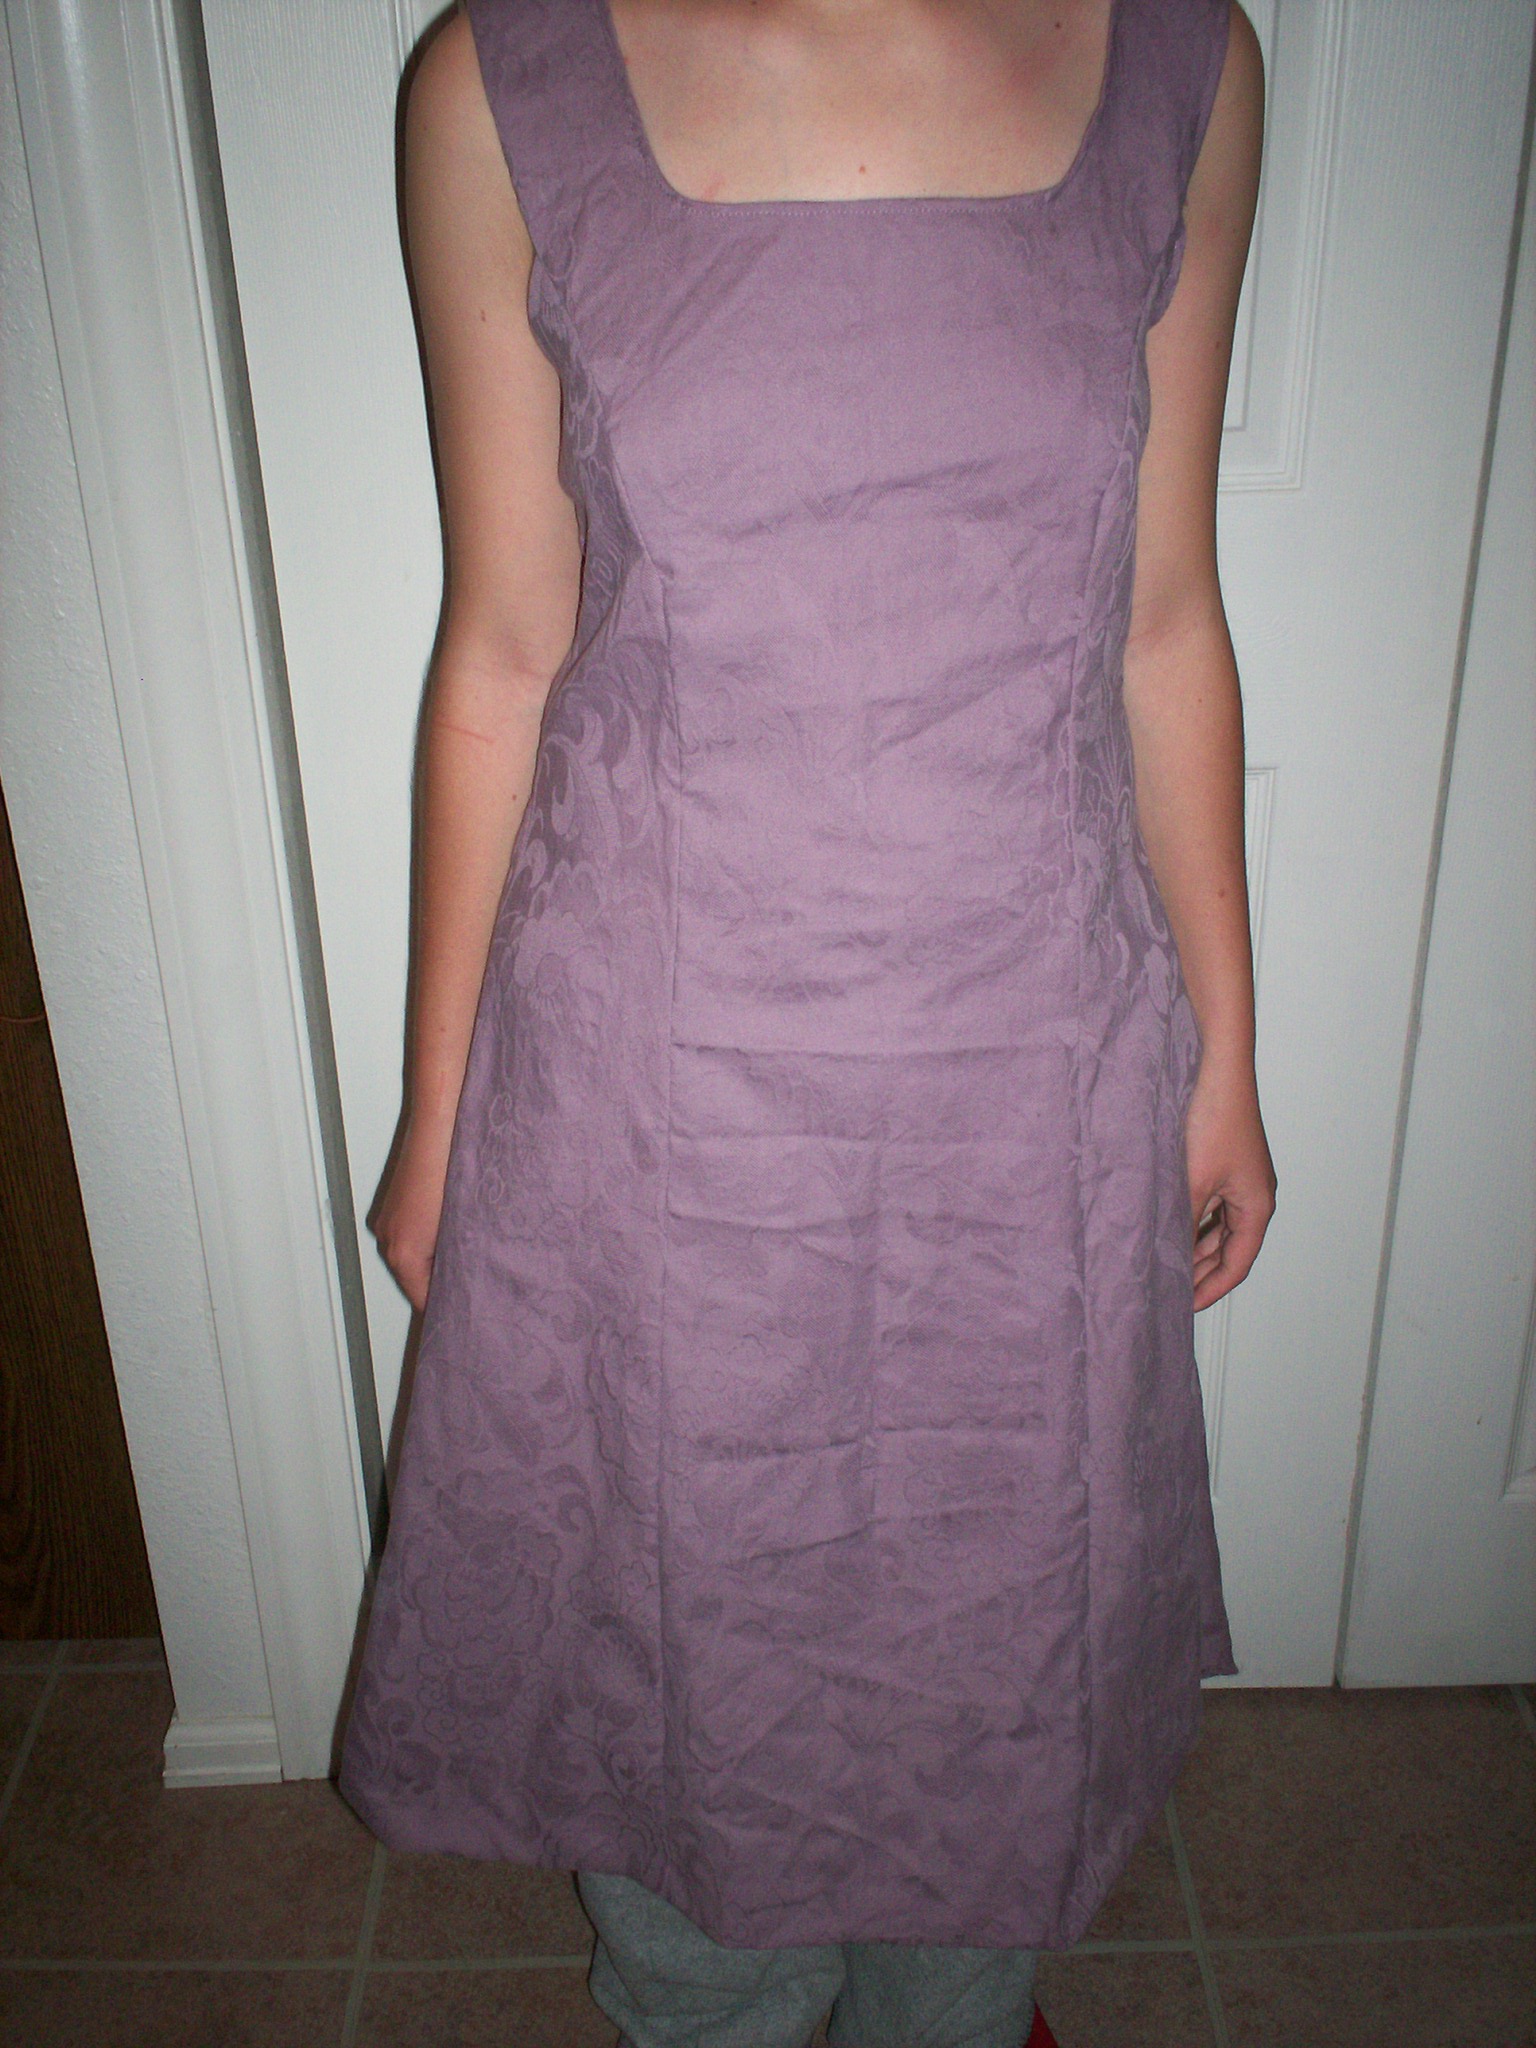 Recycled Purple Princess Seam Dress – Sewing Projects | BurdaStyle.com